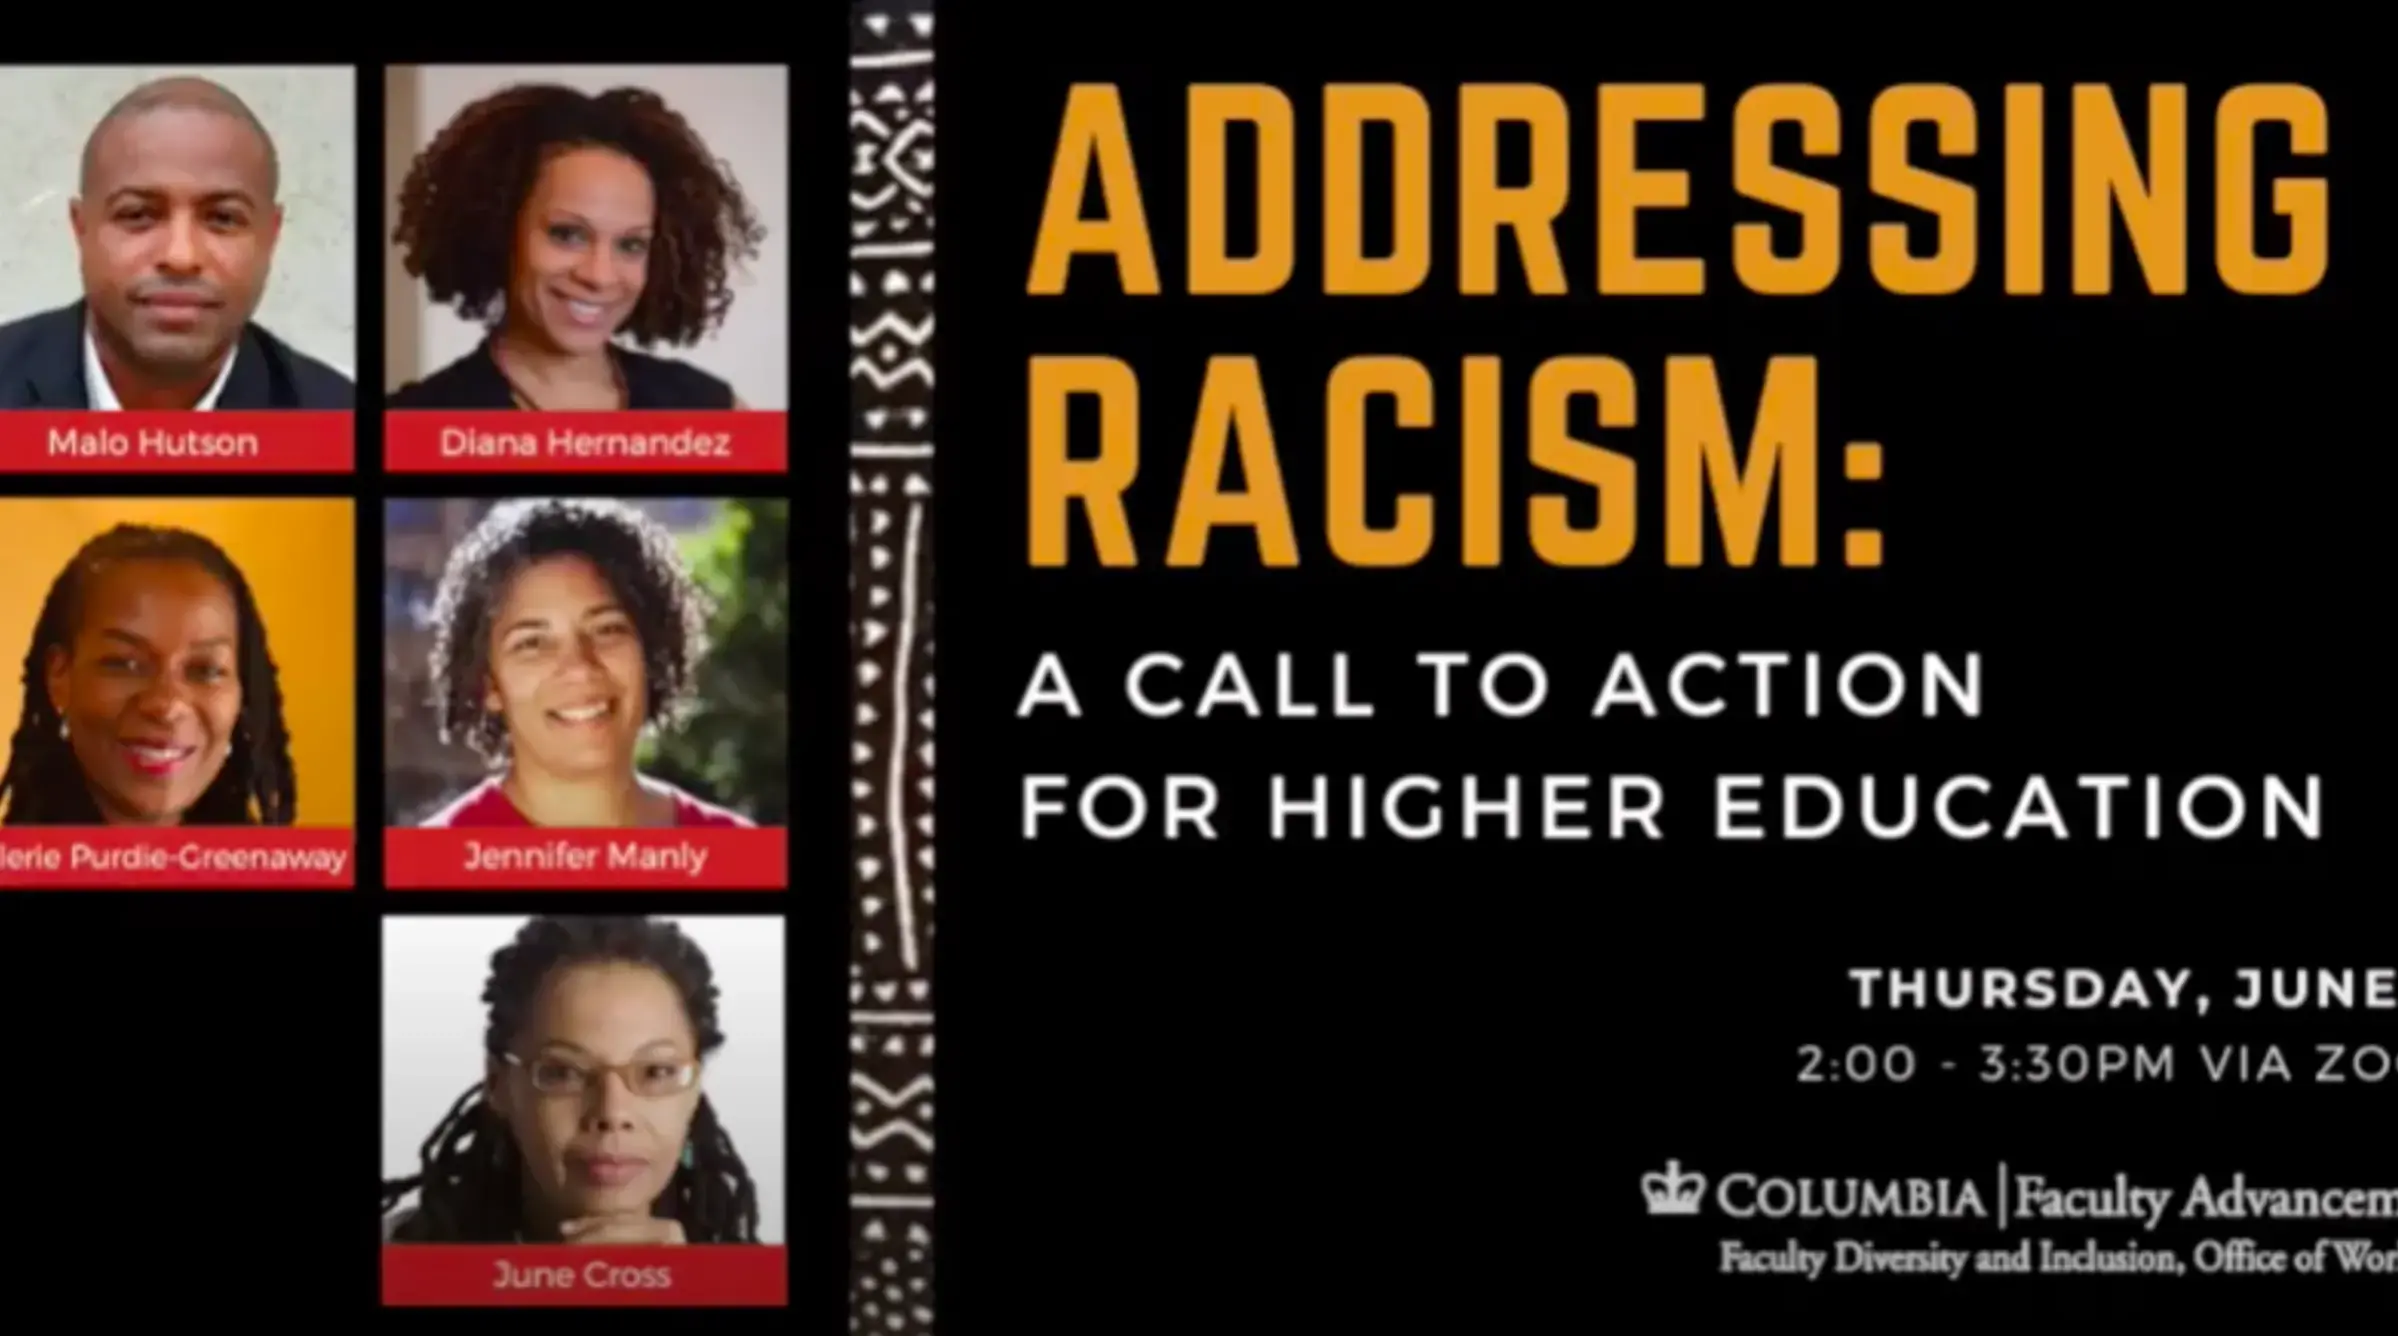 Addressing Racism: A Call to Action for Higher Education